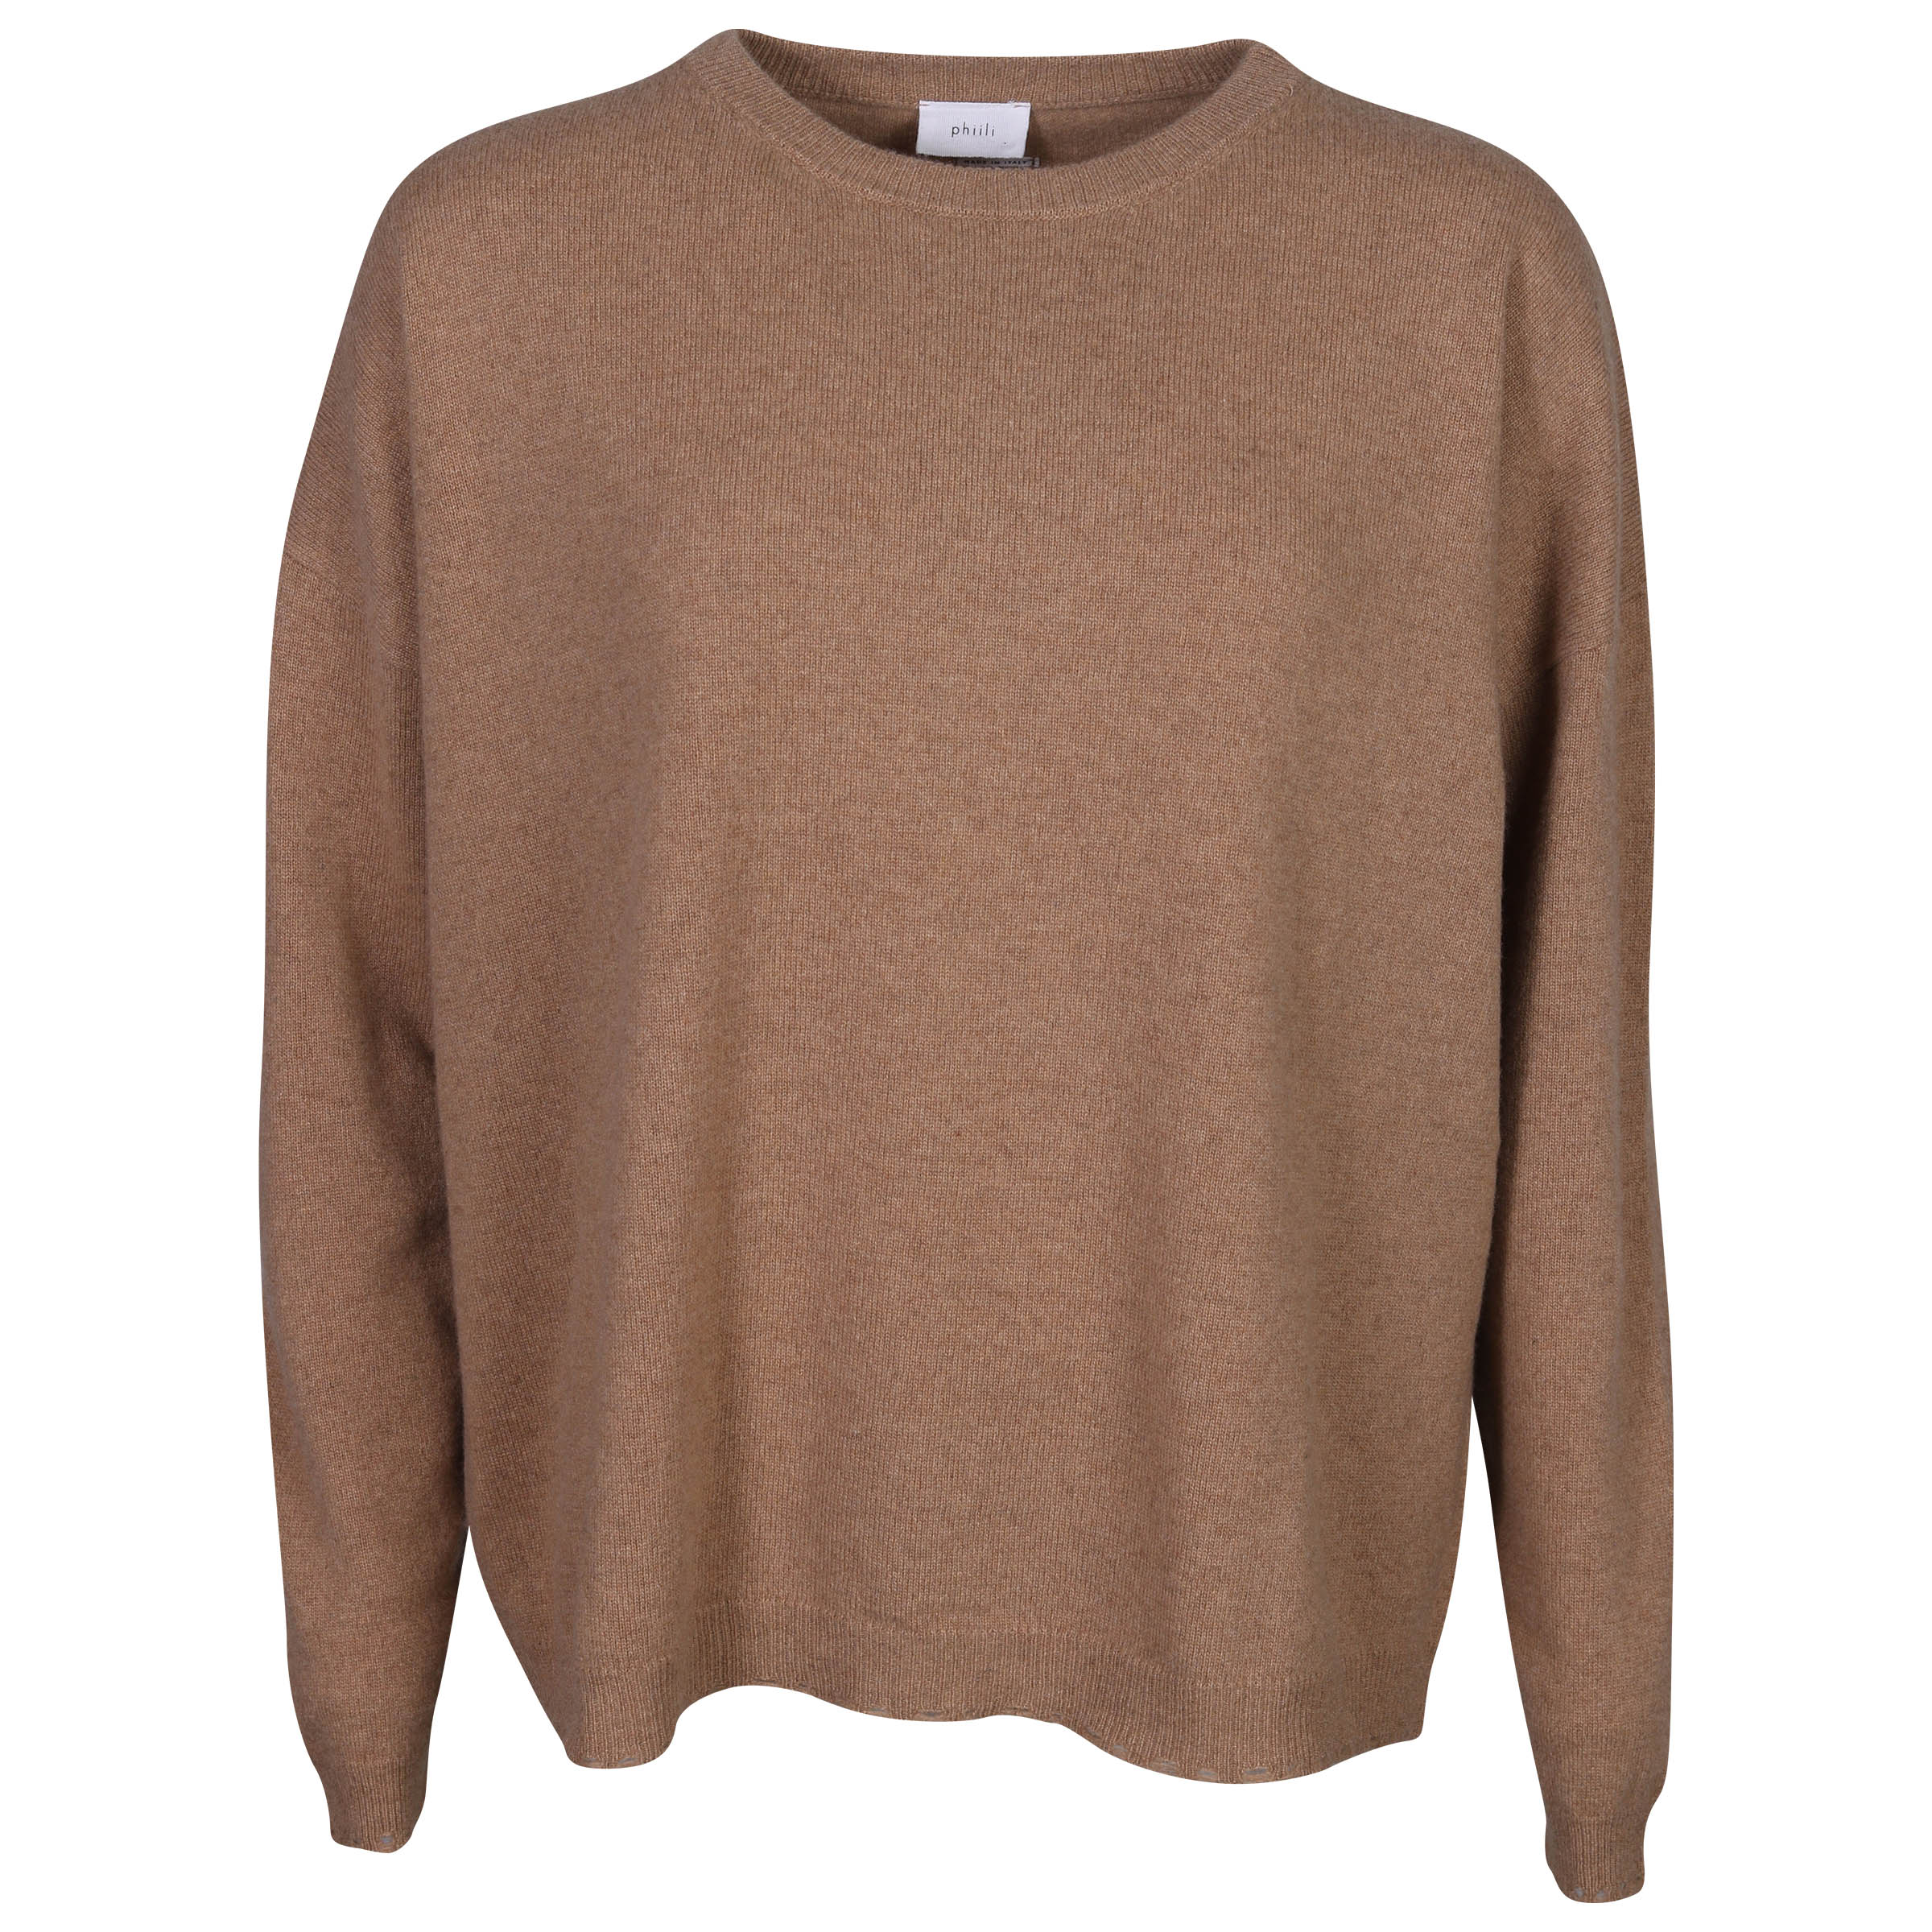 Phiili Recycled Cashmere Sweater in Camel XS/S